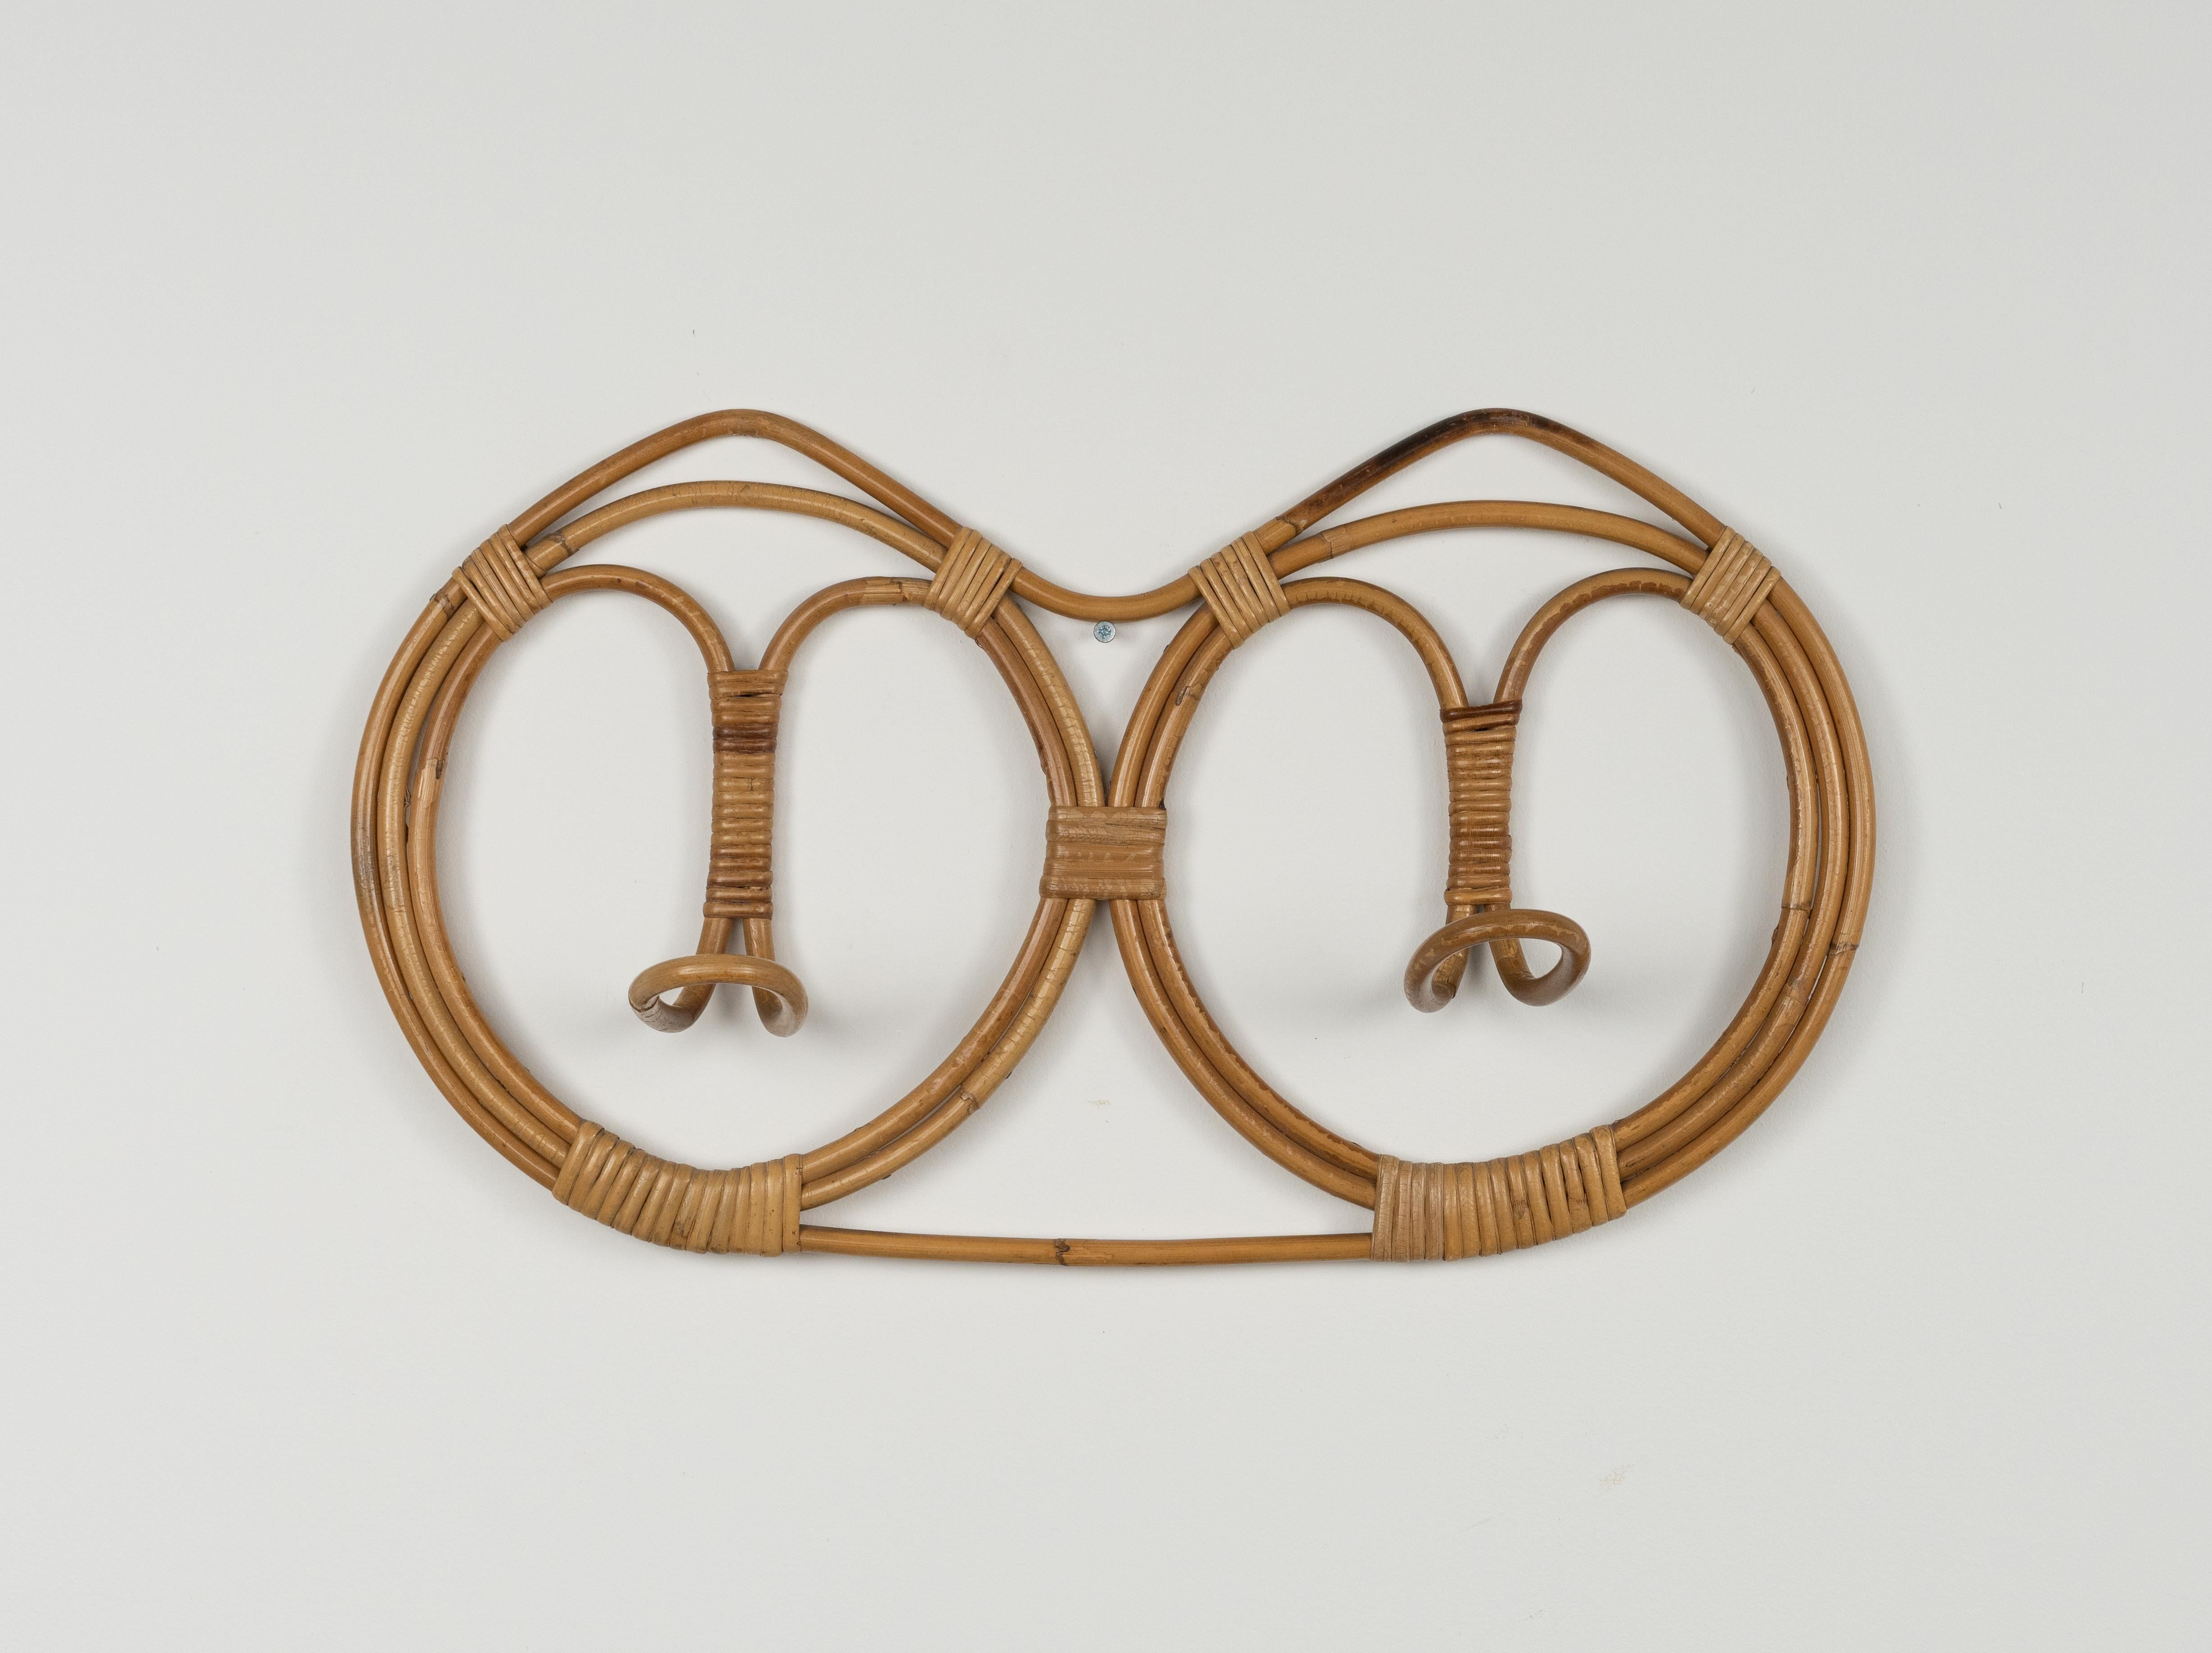 Midcentury Wall Coat Rack in Bamboo and Rattan by Franco Albini, Italy 1960s For Sale 5